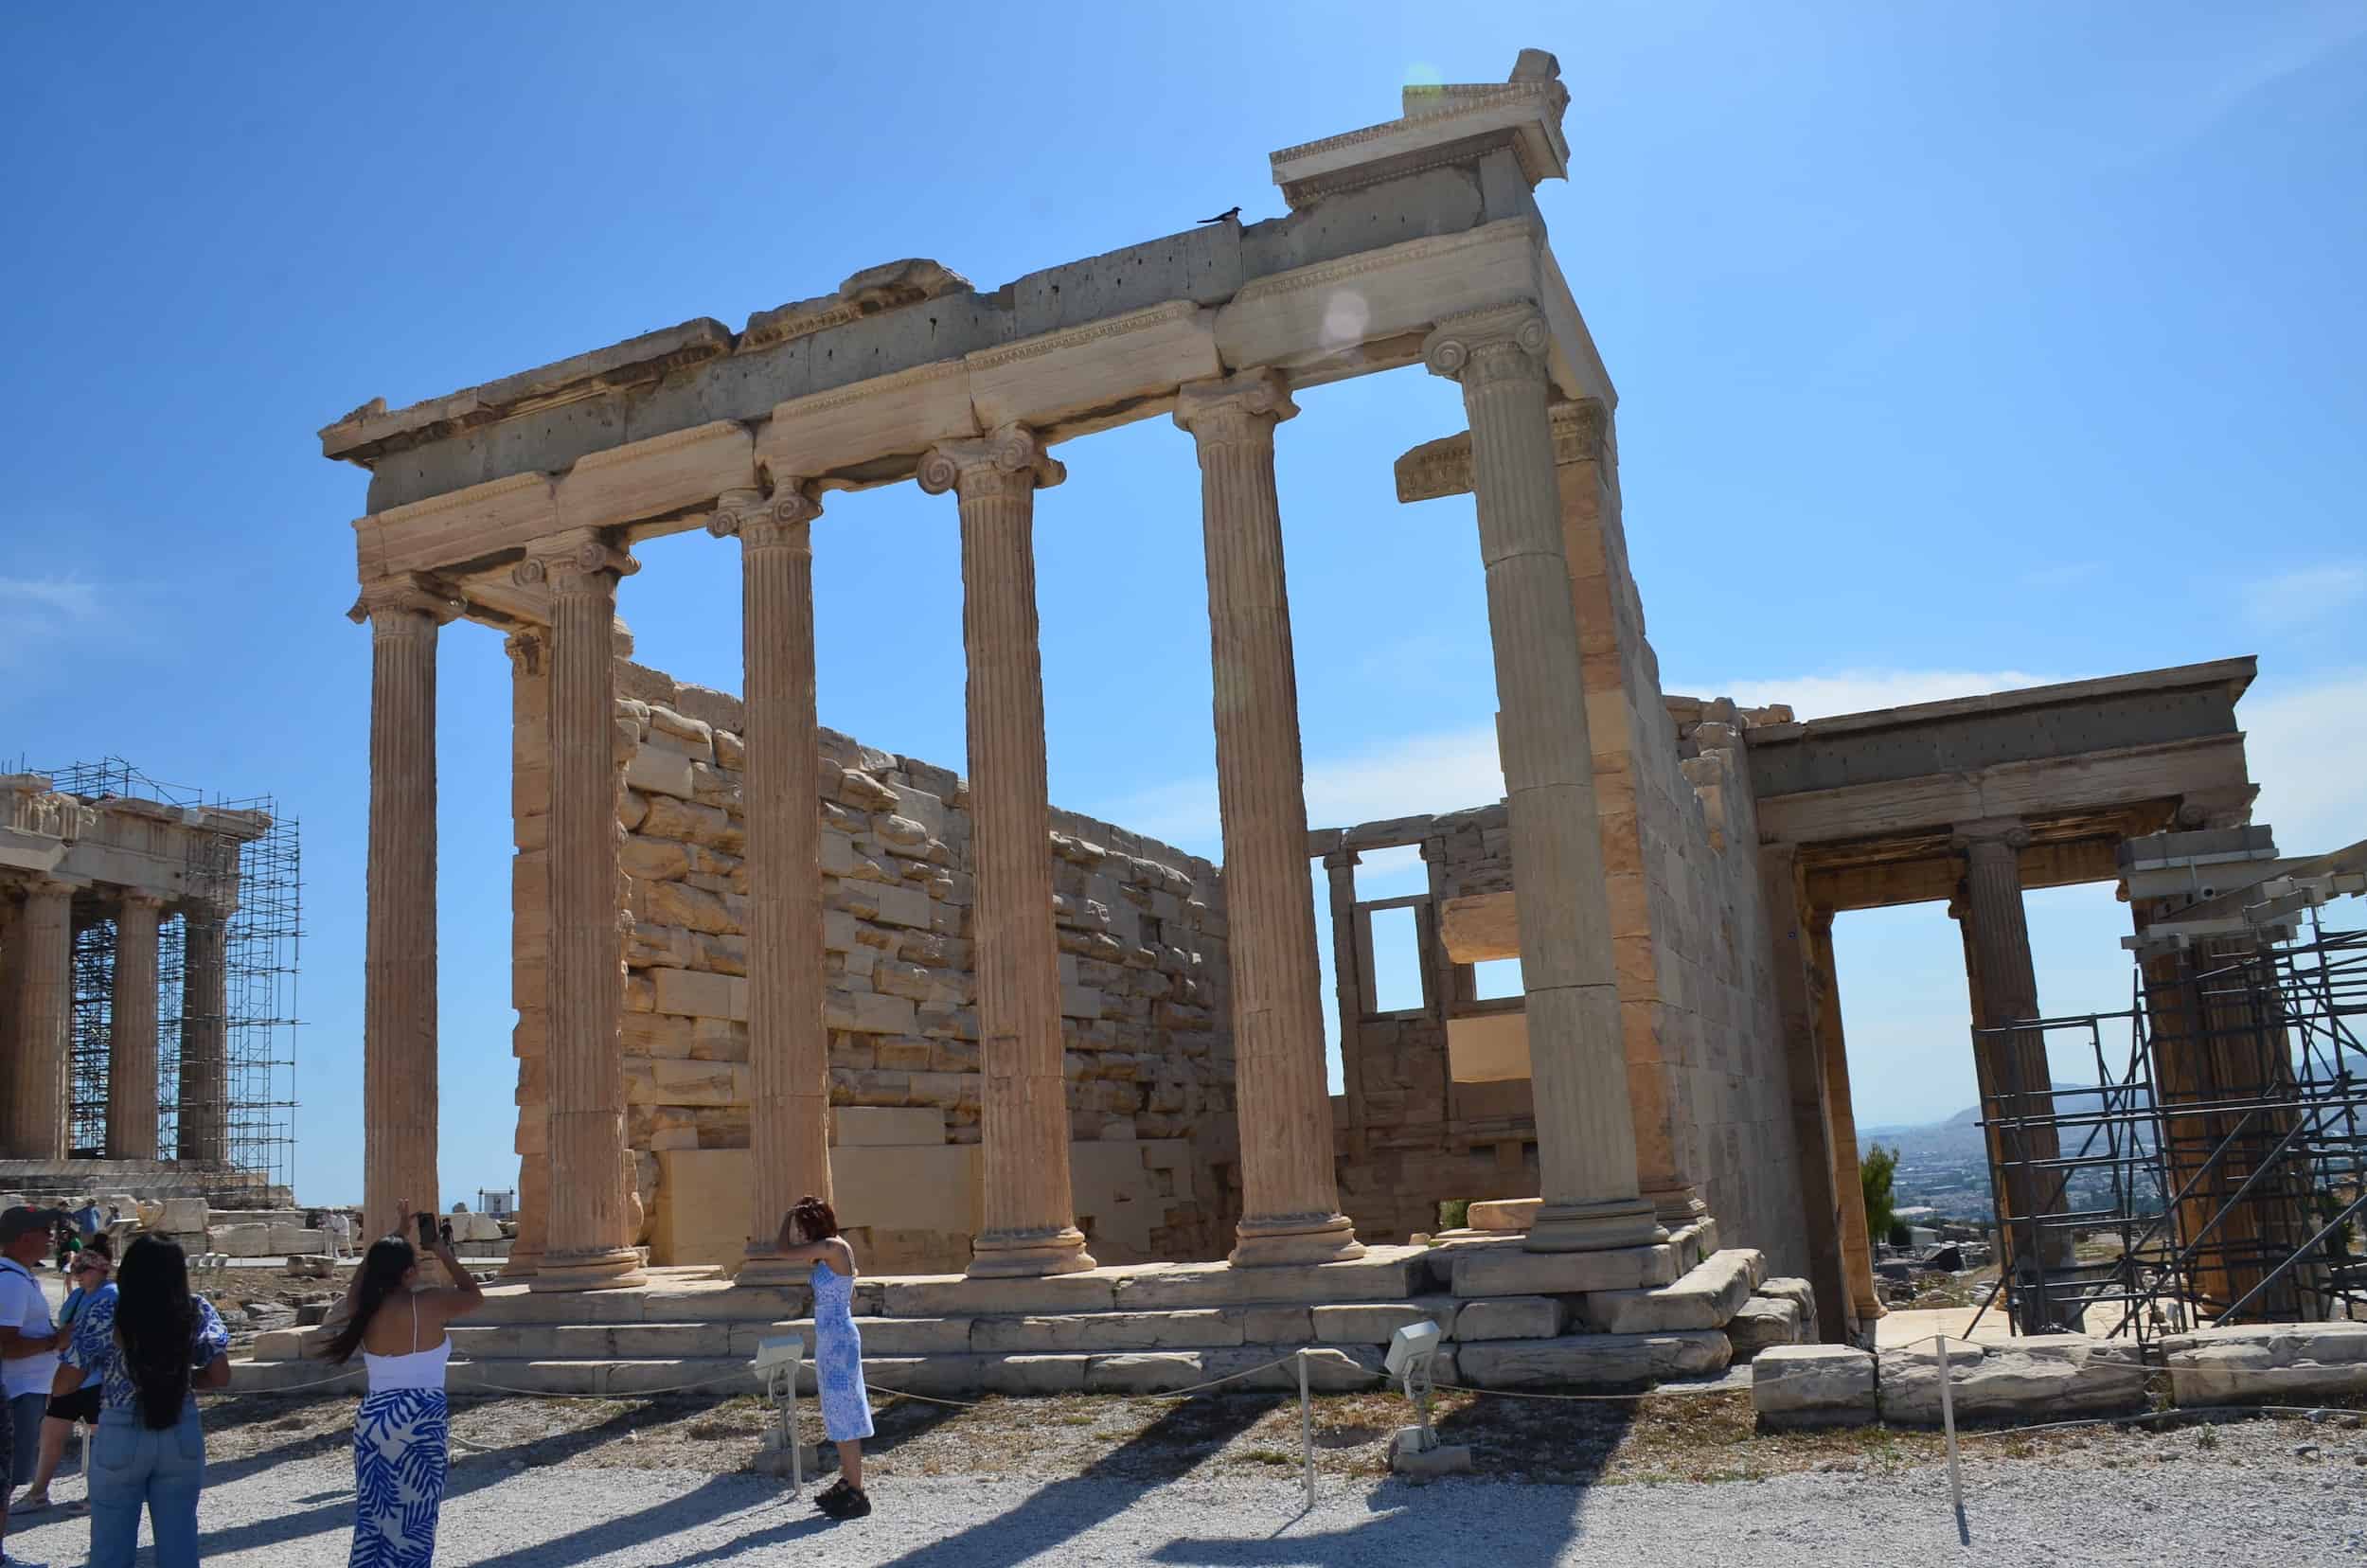 East side of the Erechtheion